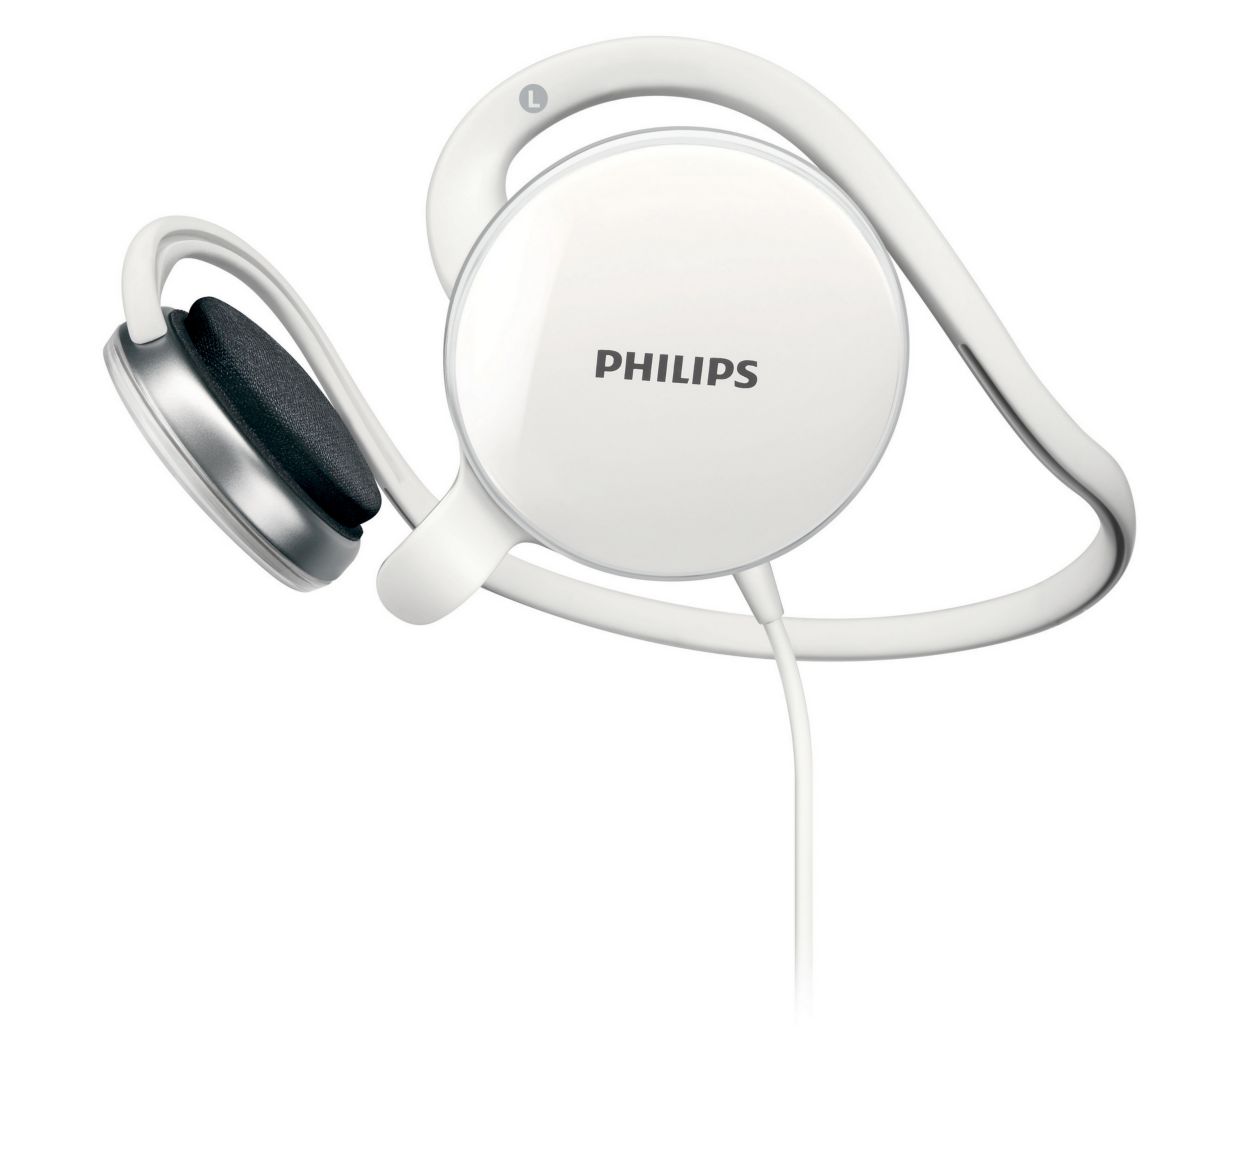 Philips chat